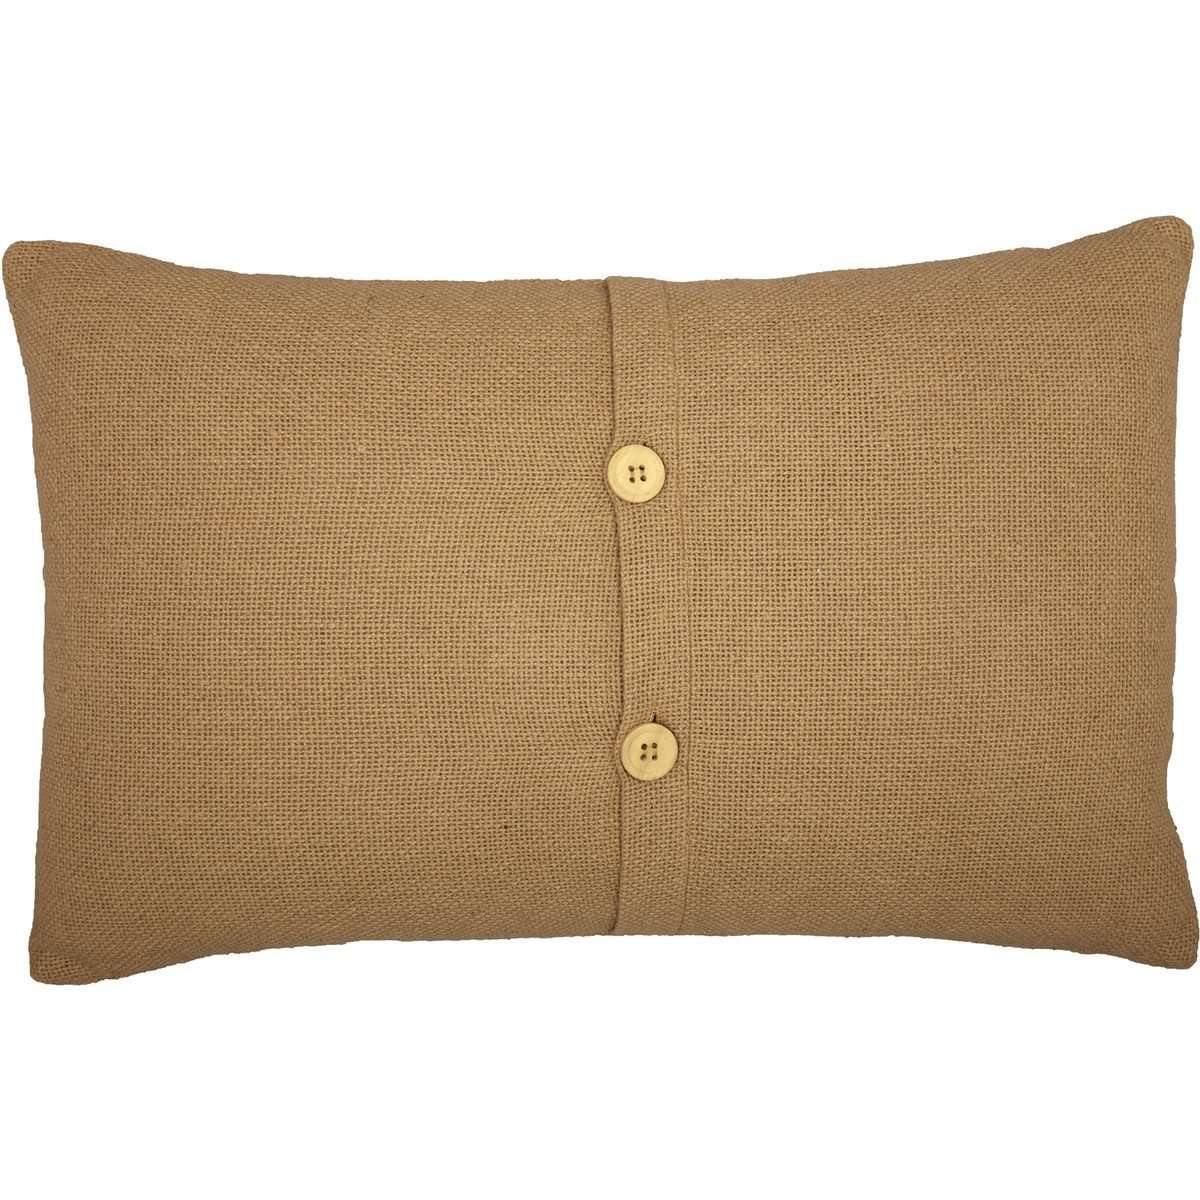 Heritage Farms Autumn Greetings Pillow 14x22 VHC Brands back